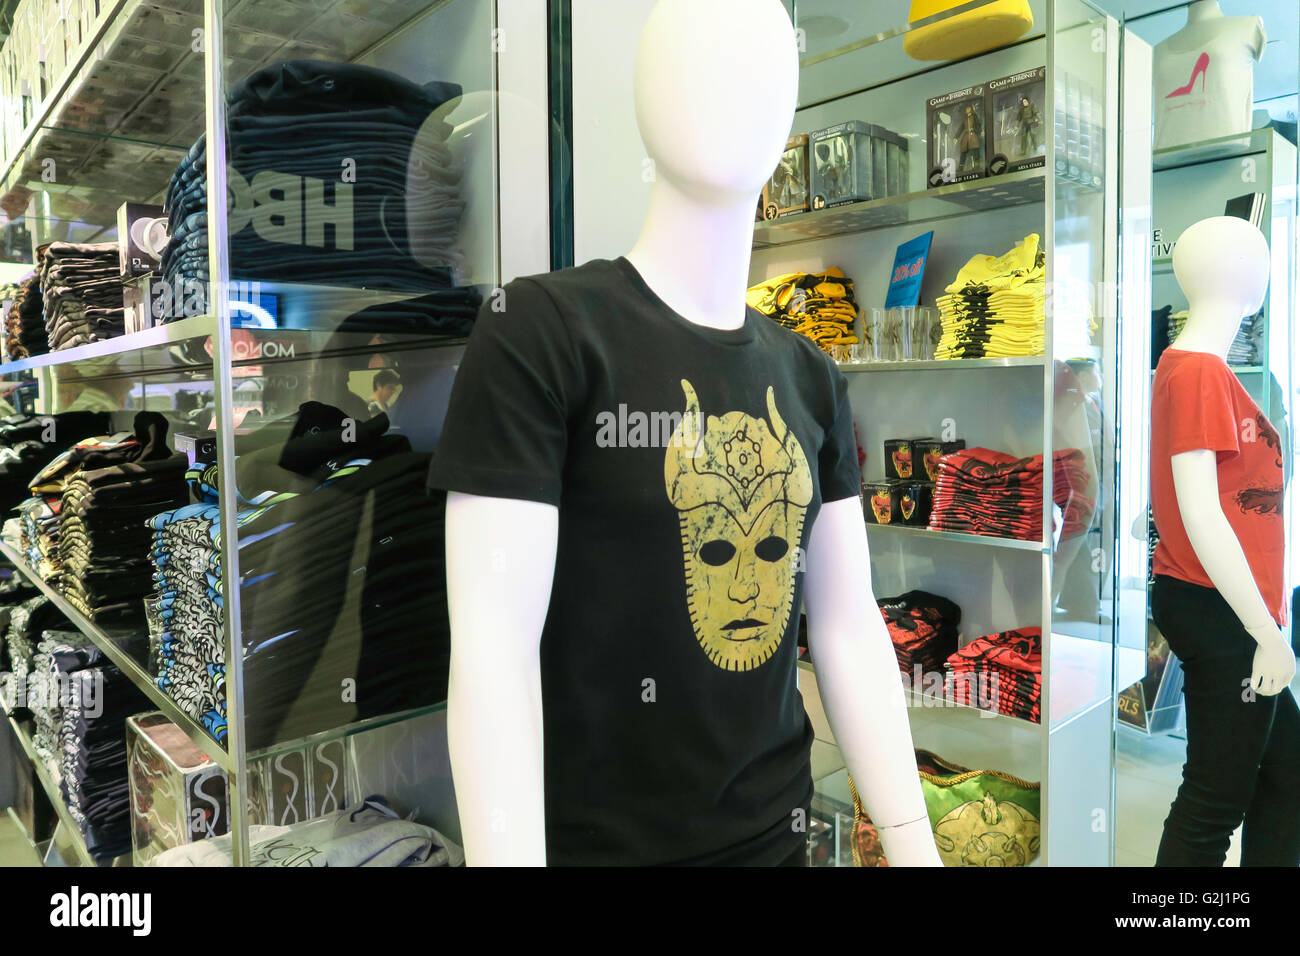 HBO Gift Shop "Game of Thrones" Merchandise, 6th Avenue, NYC Stock Photo -  Alamy